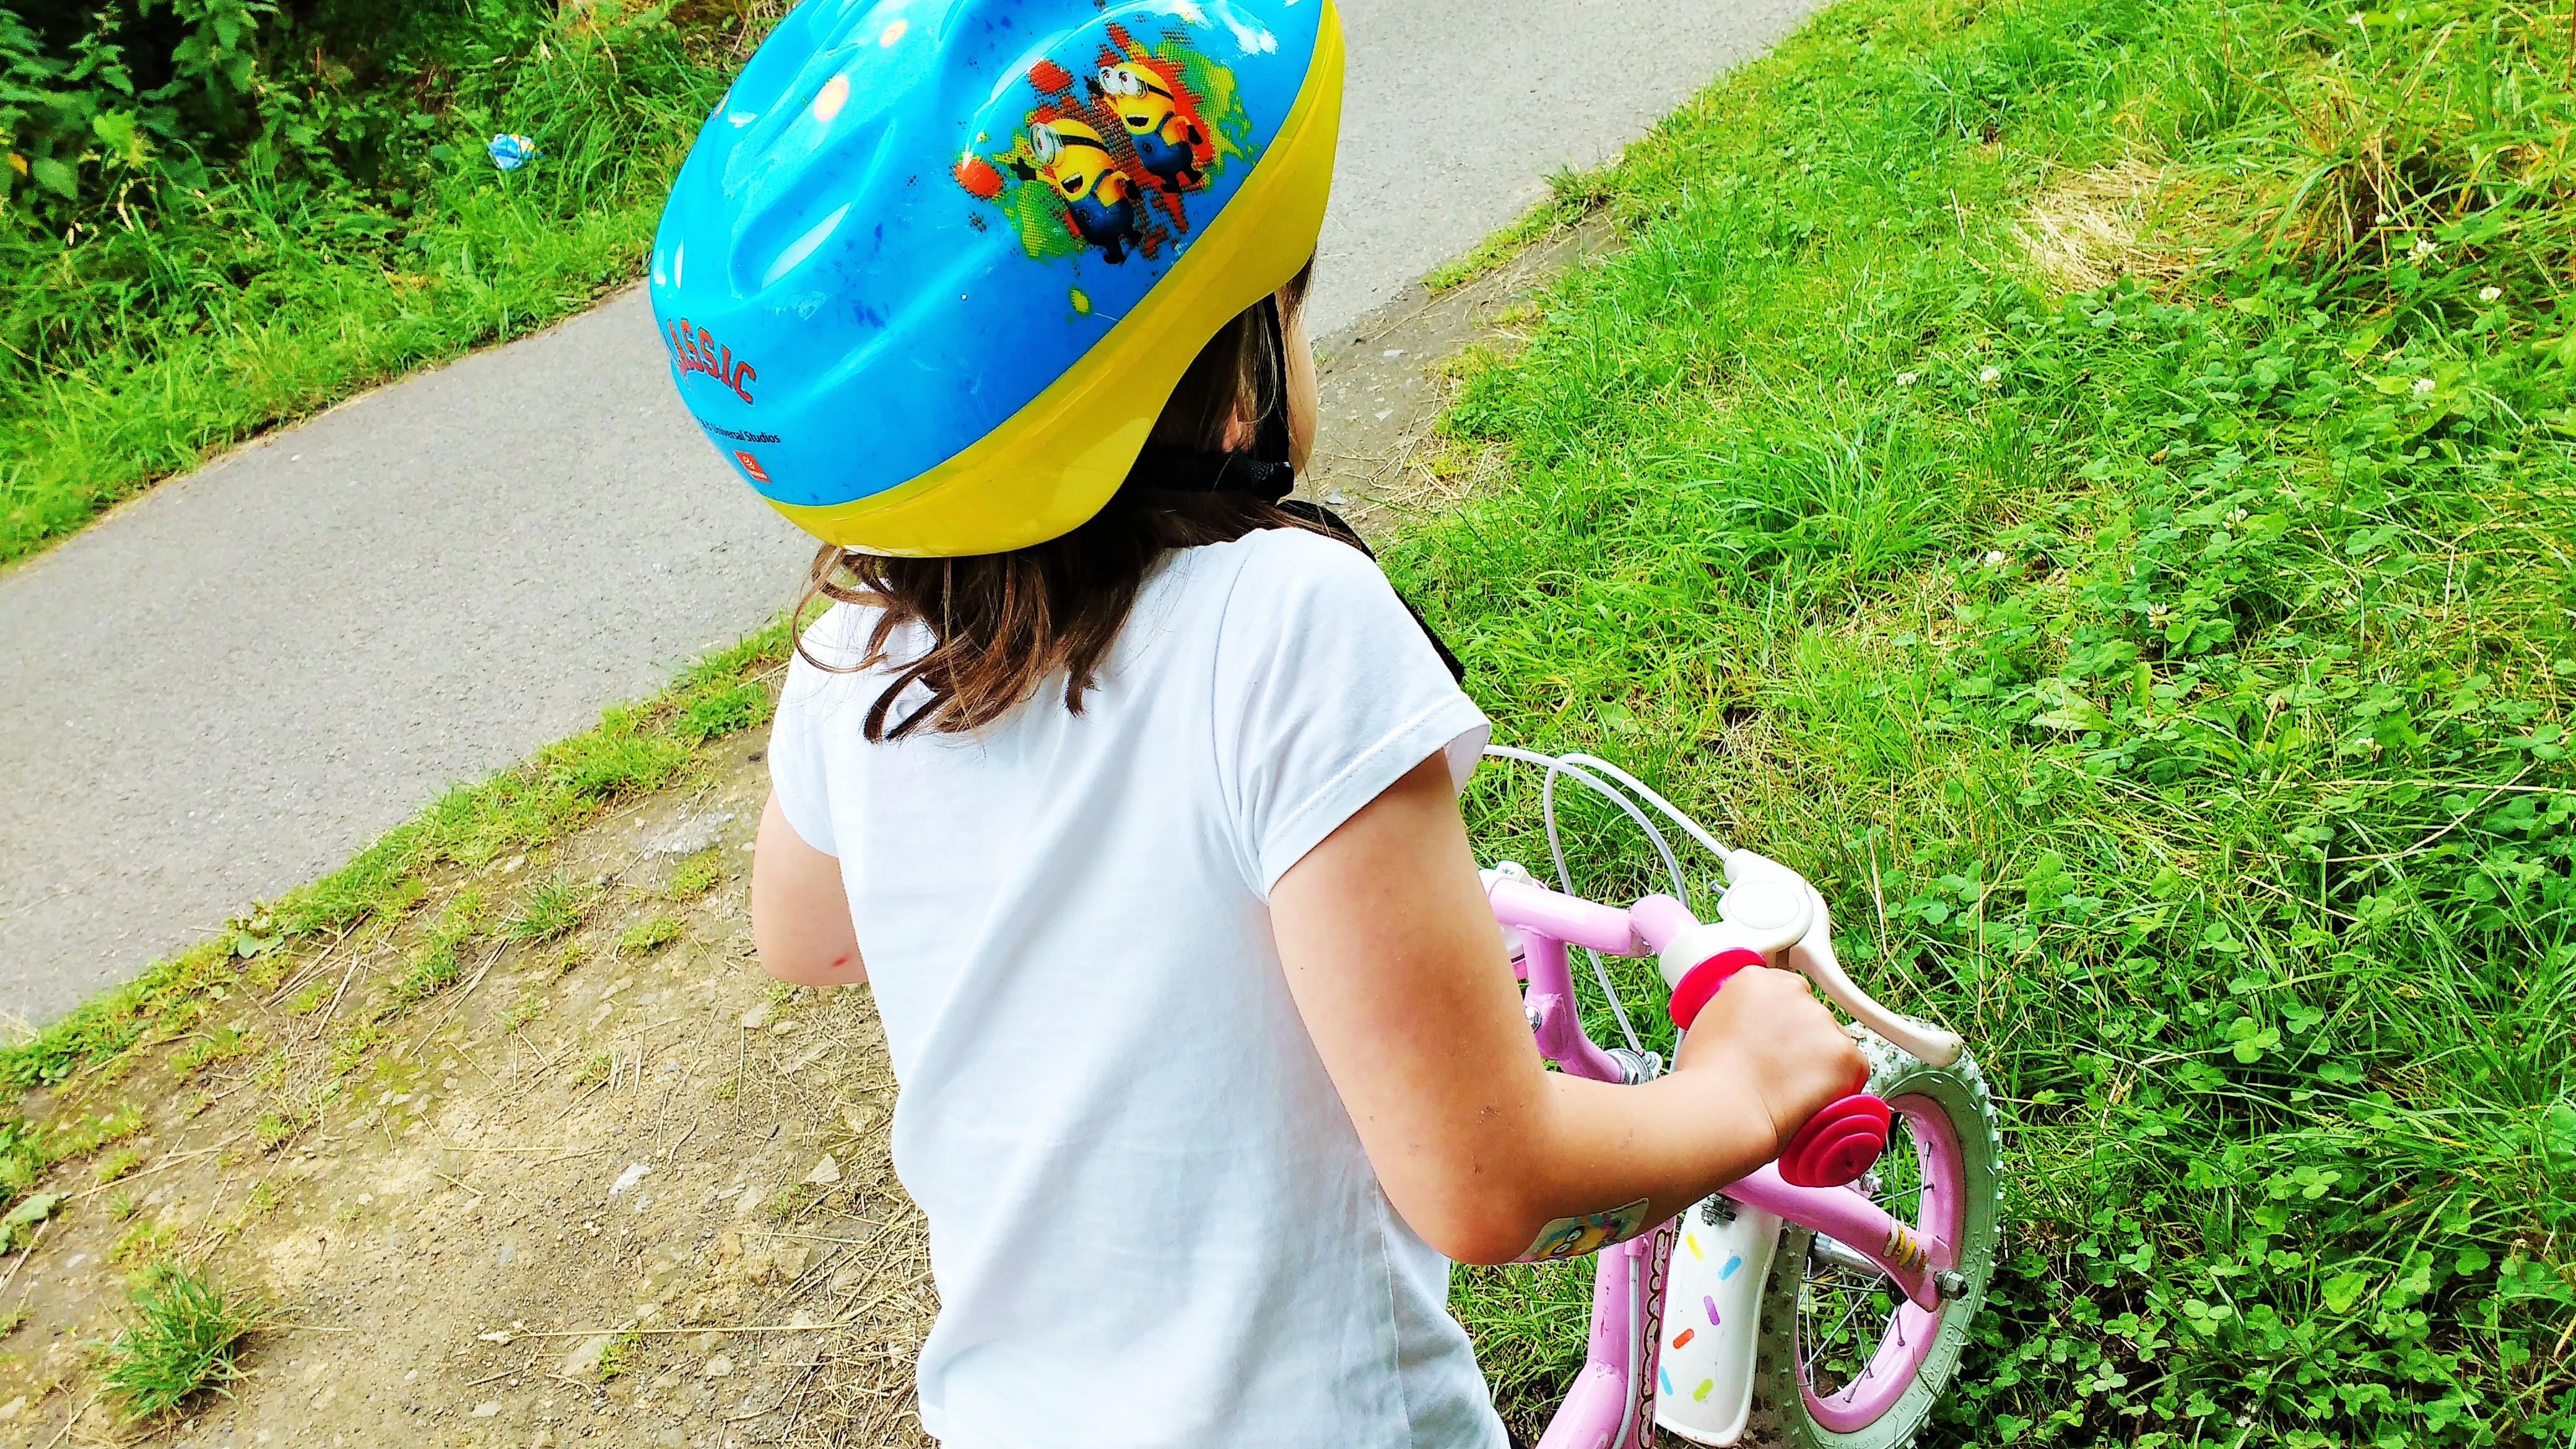 Ride a bike despicable me helmet themed activities